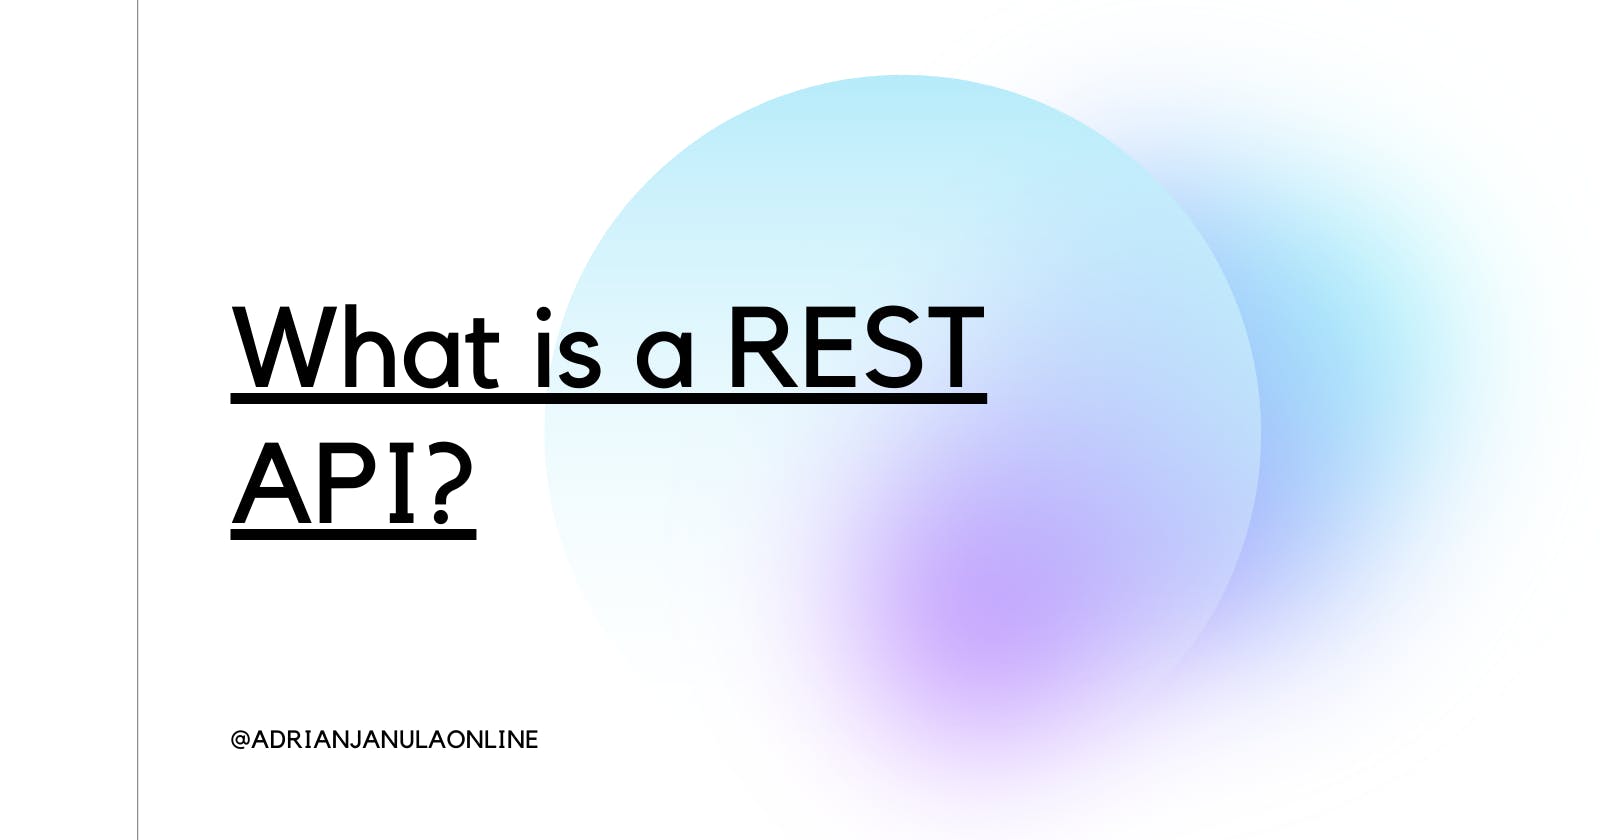 REpresentational State Transfer. WHAT IS A REST API?